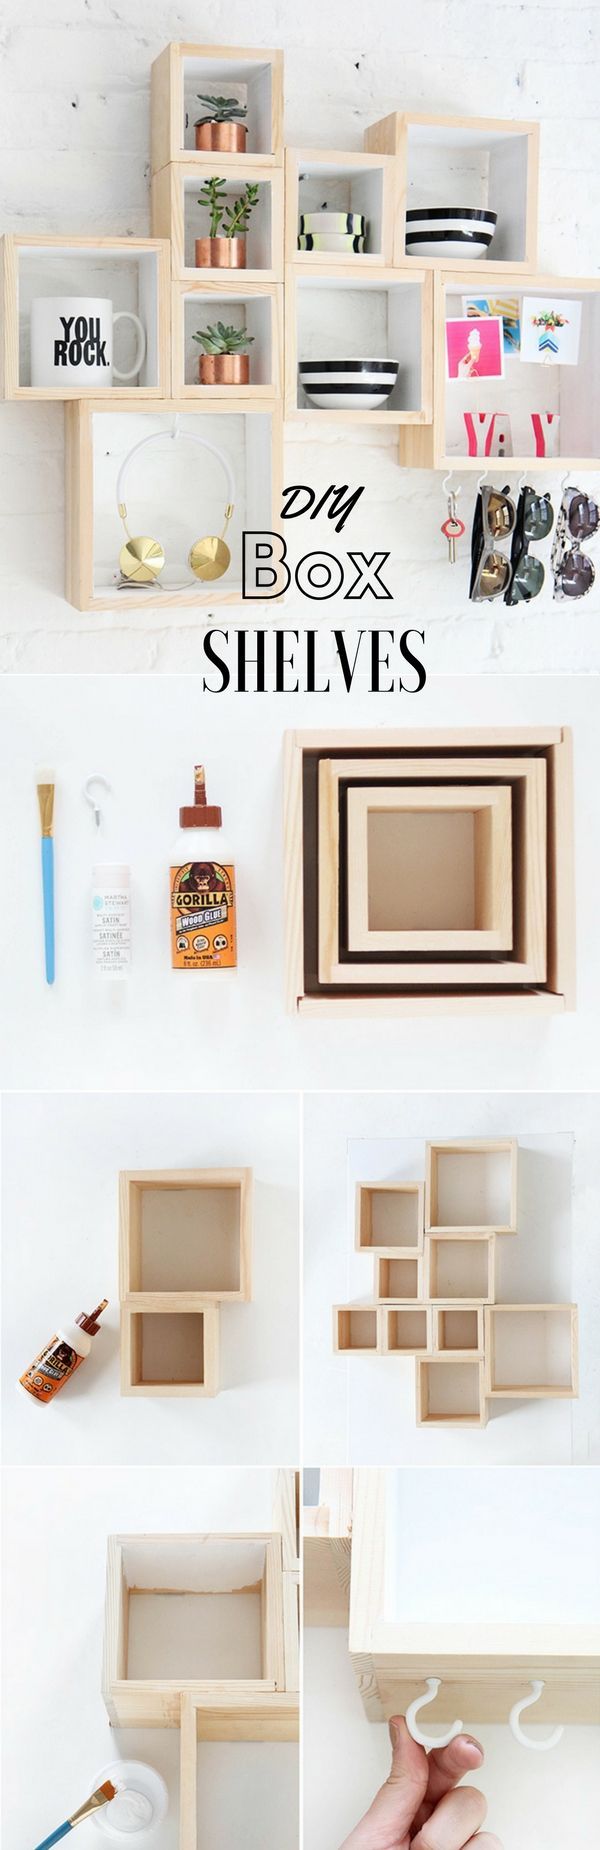 Check out the tutorial: #DIY Box Shelves @istandarddesign